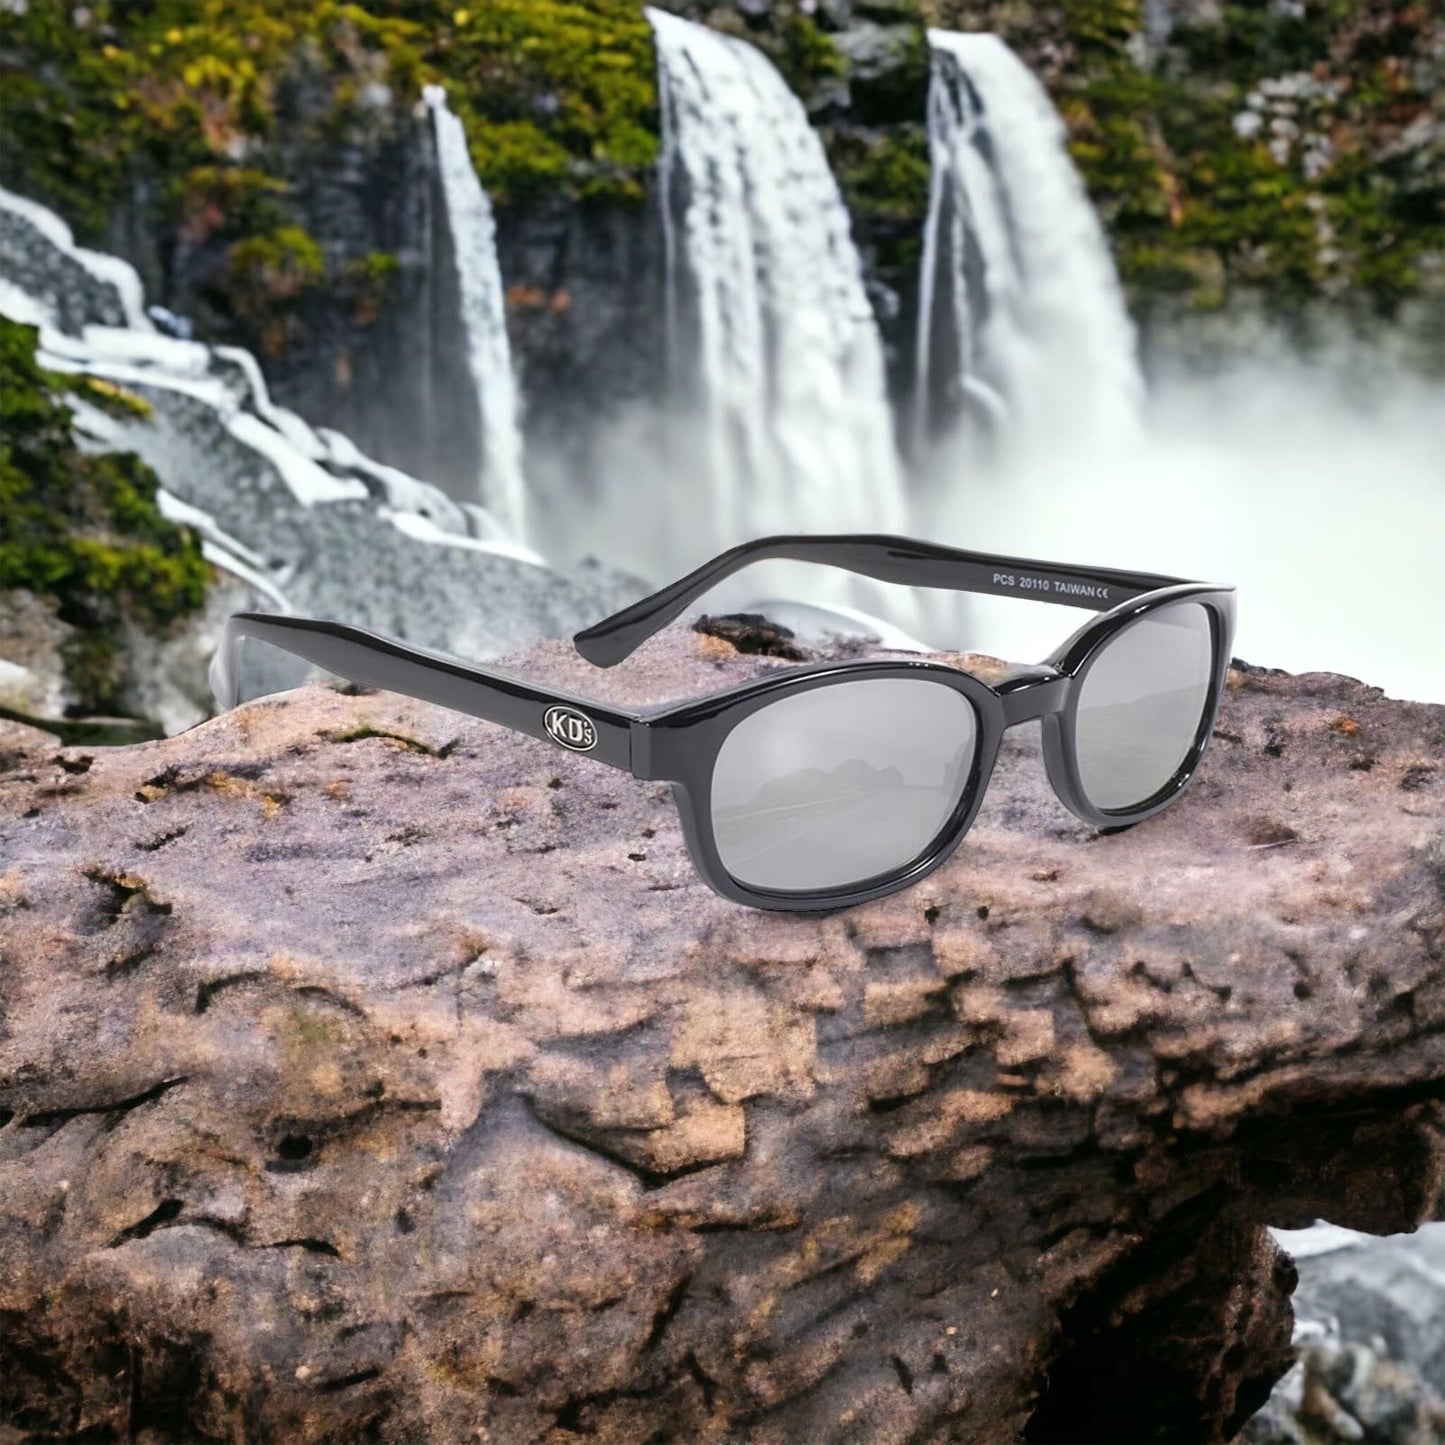 KD's 20110 sunglasses that fit under a motorcycle or ski helmet. With a stylish black frame and silver mirror lenses set on a rock in front of a waterfall.